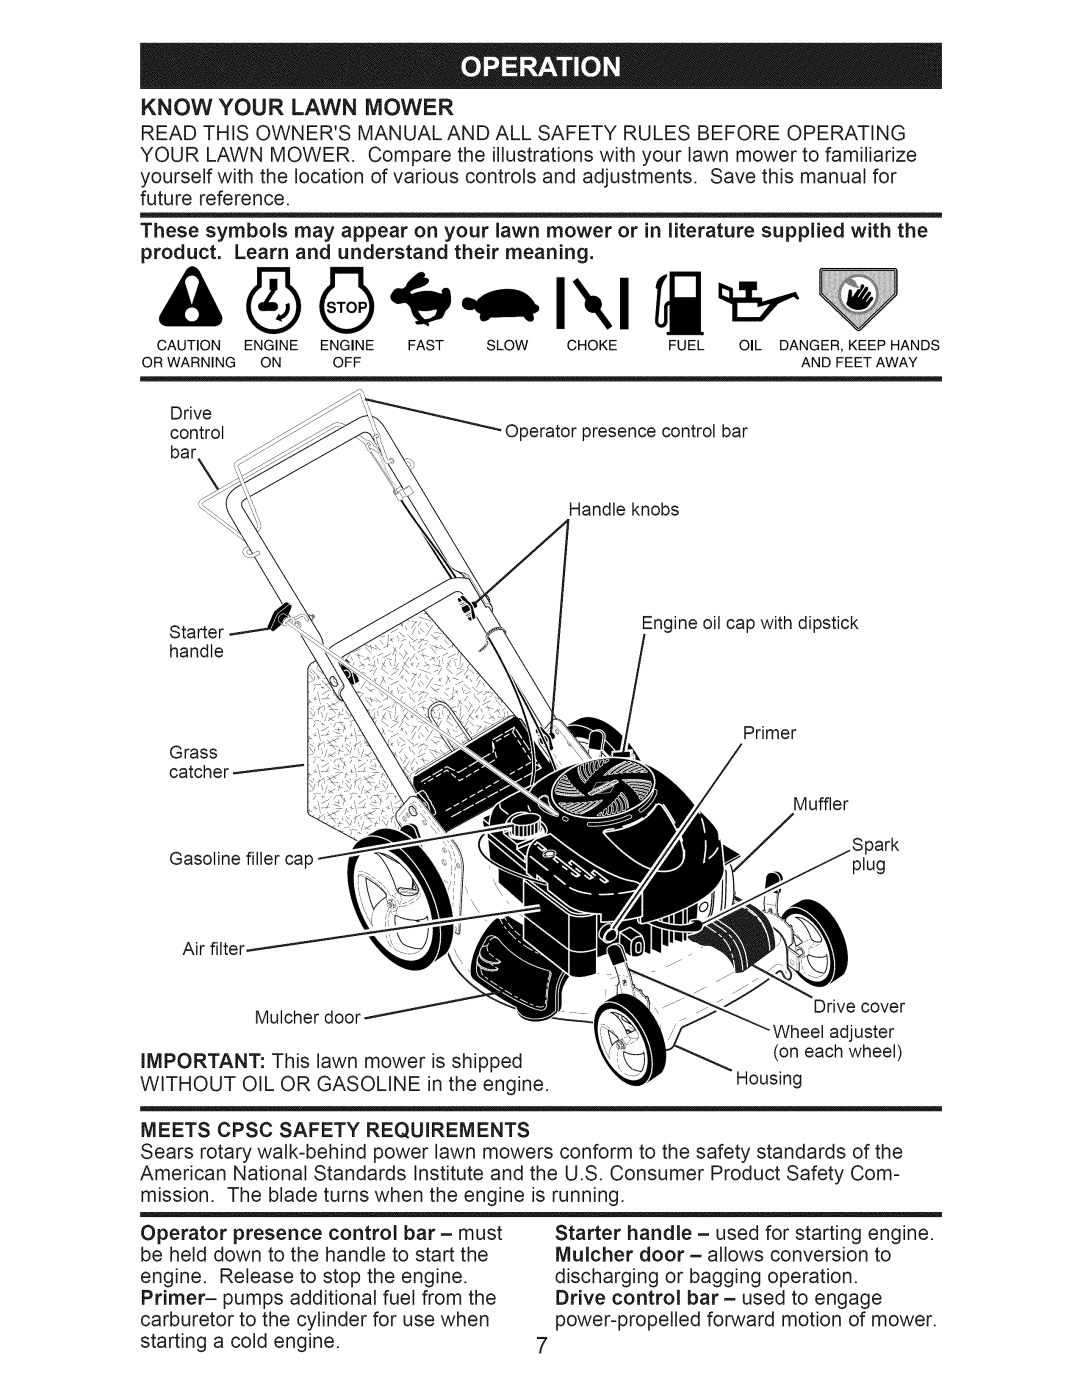 Craftsman 917.376233 owner manual Know Your Lawn Mower, Meets Cpsc Safety Requirements 